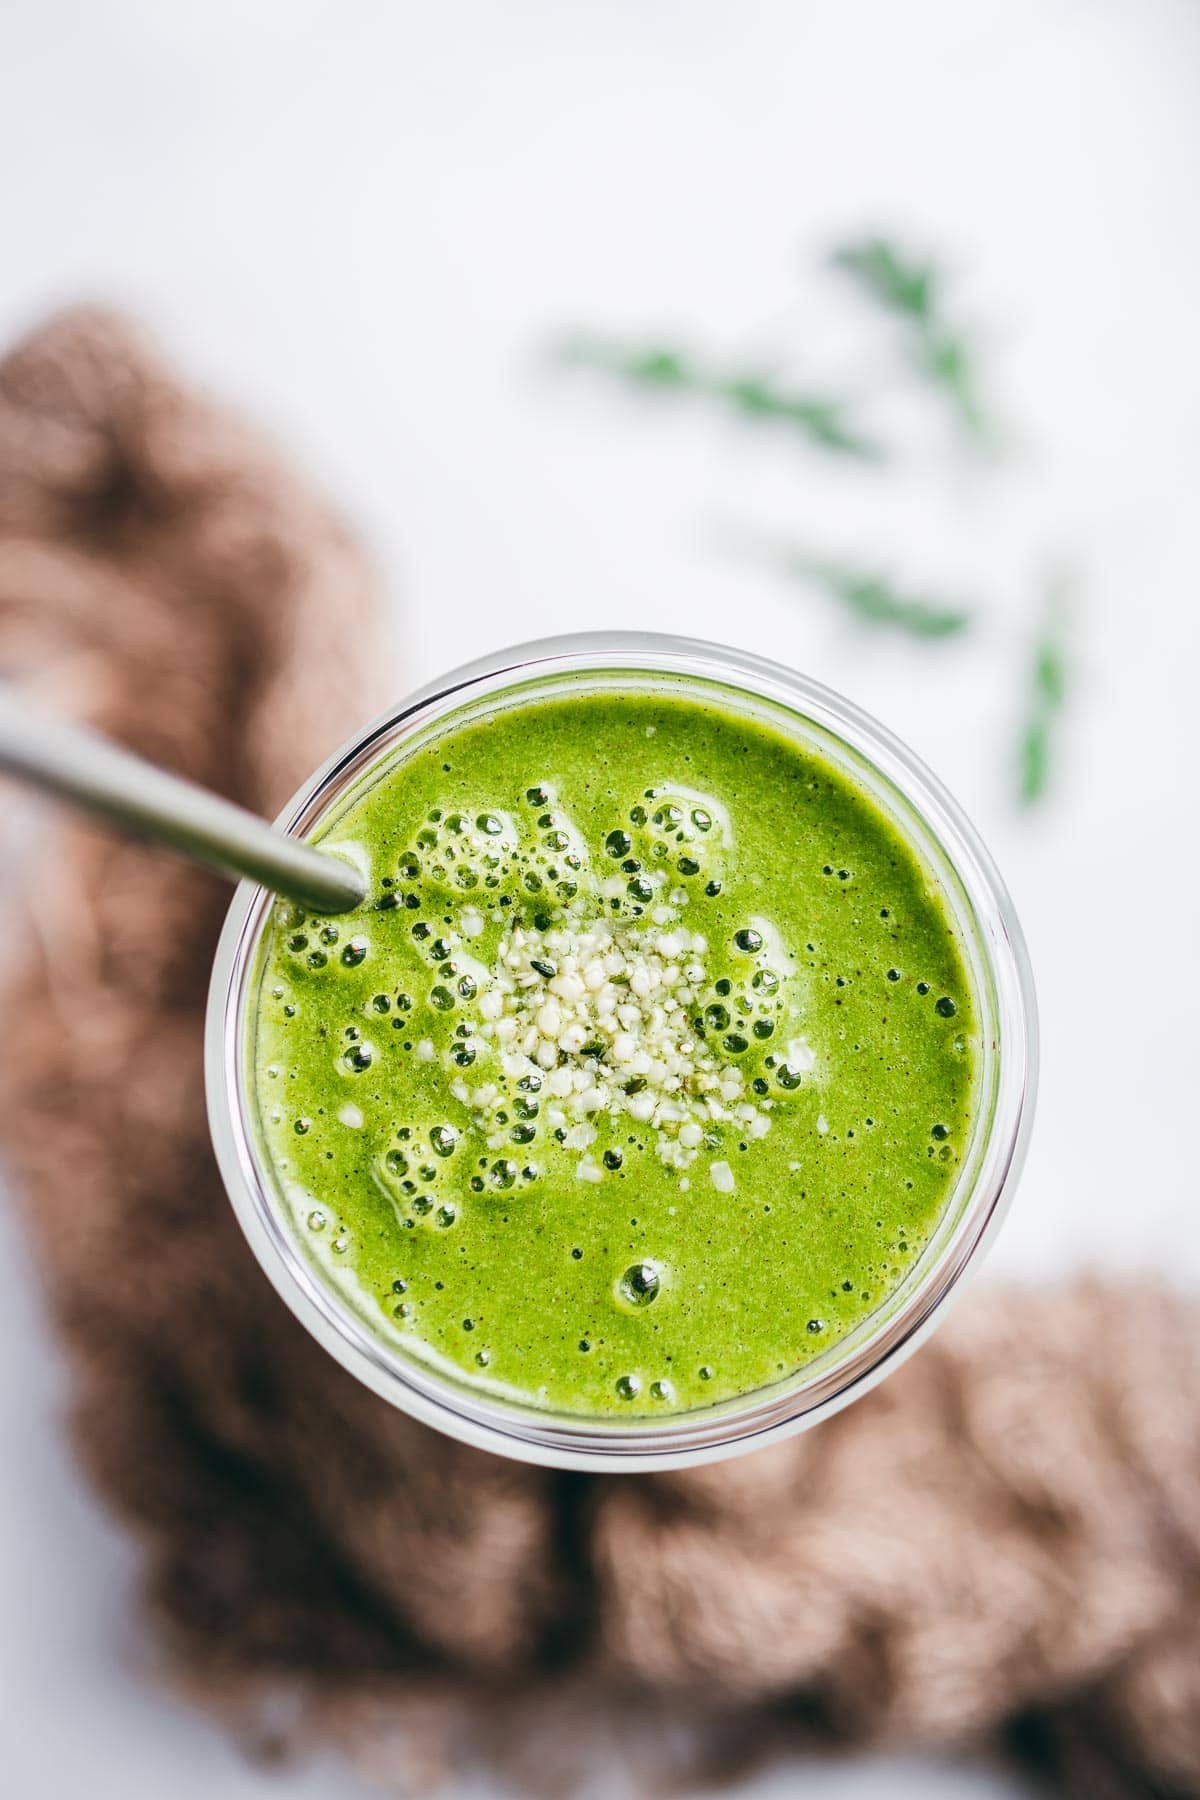 a bright green arugula smoothie recipe in a clear glass with a metal straw garnished with small white seeds.